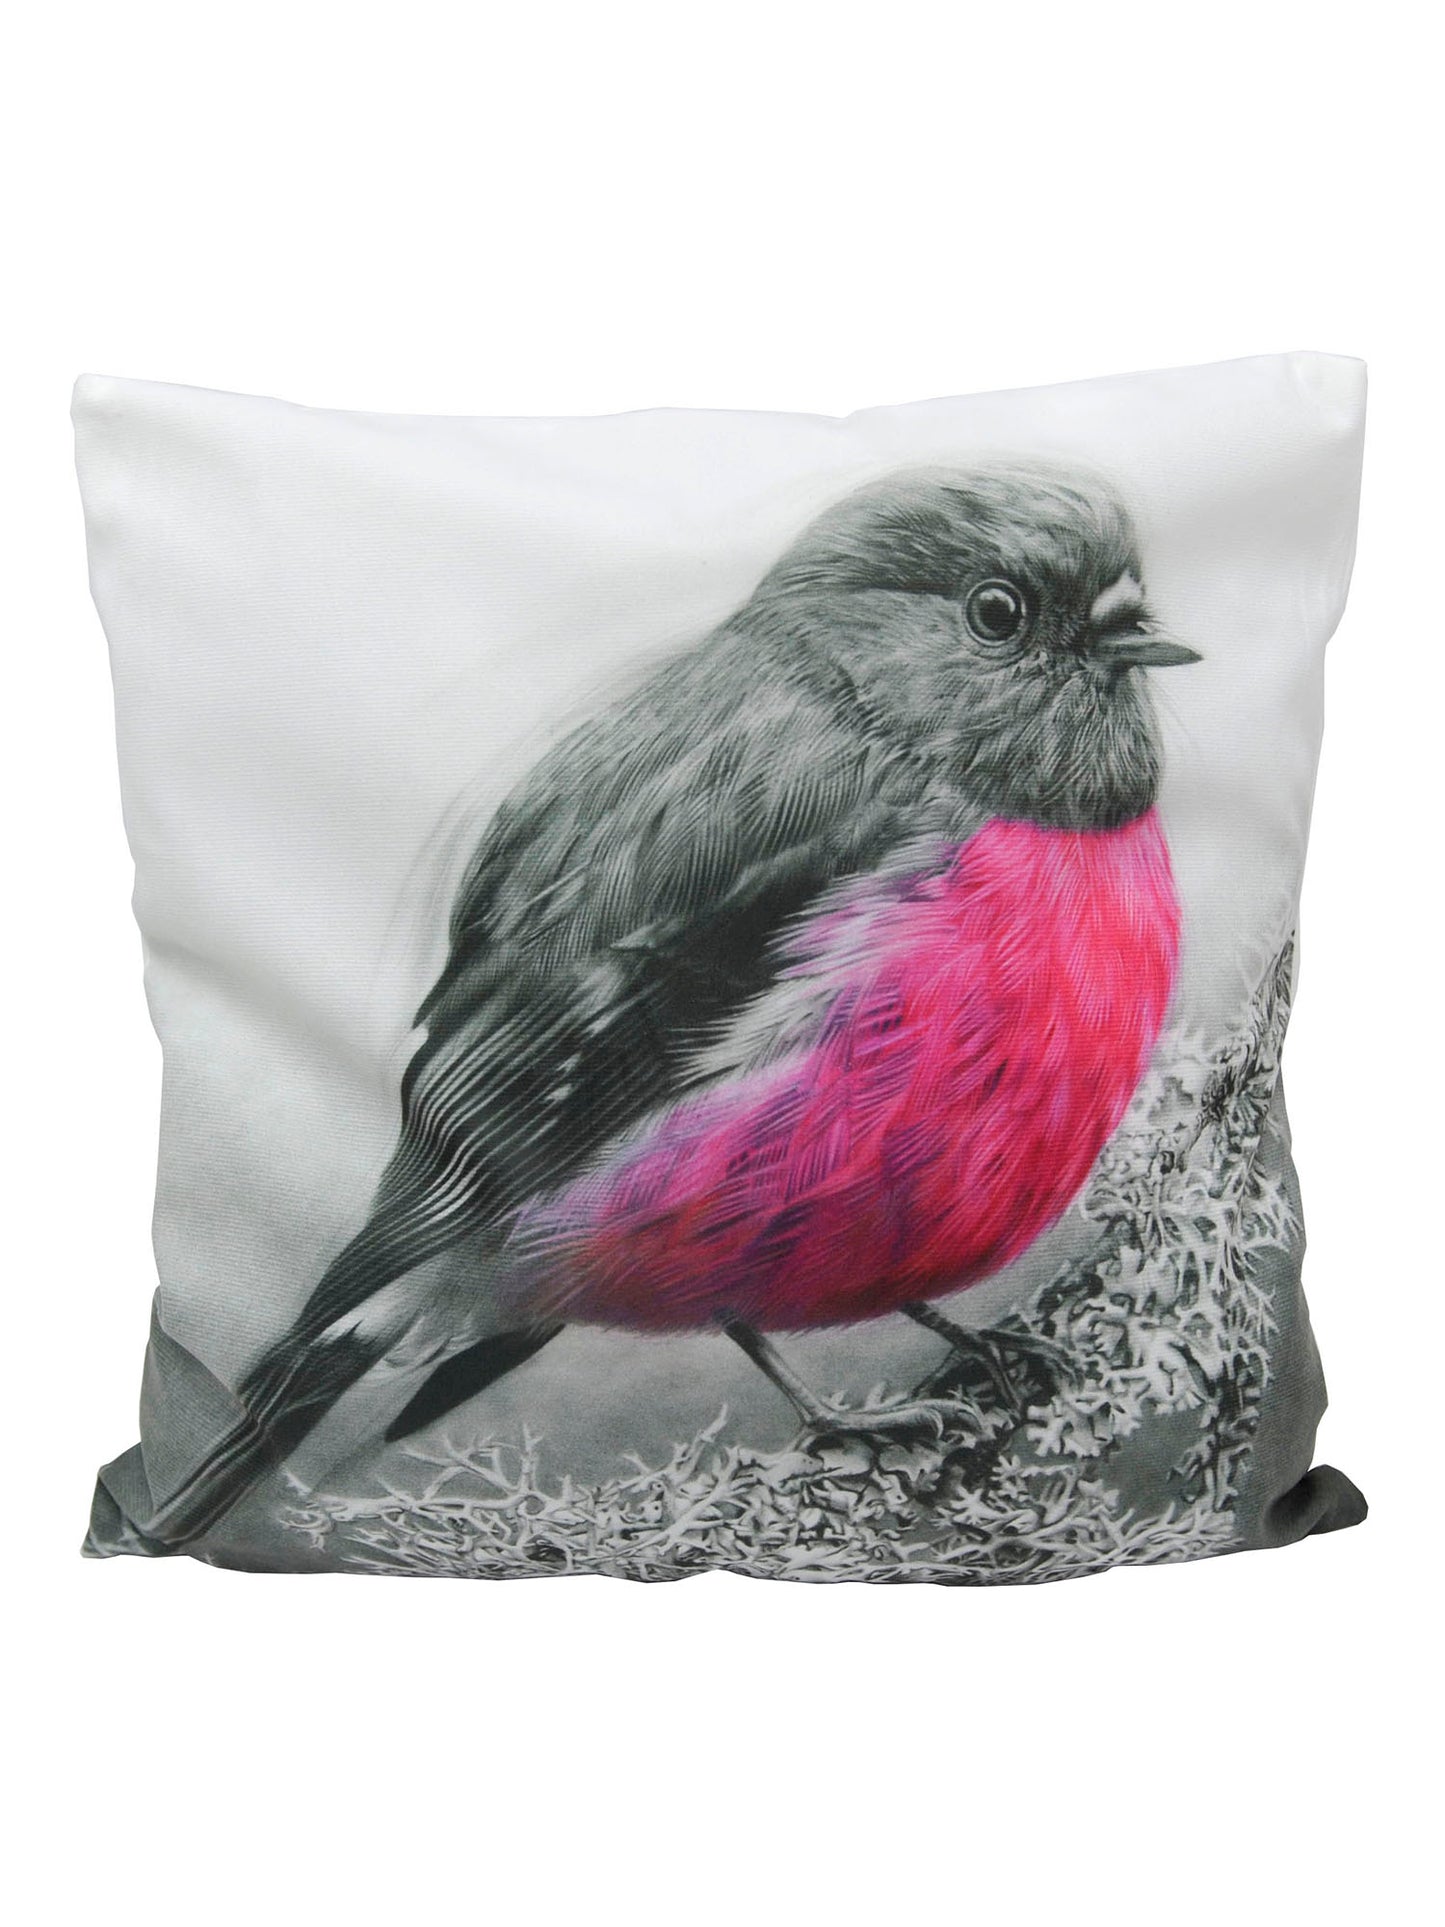 Cushion cover featuring 'Pink Robin' artwork